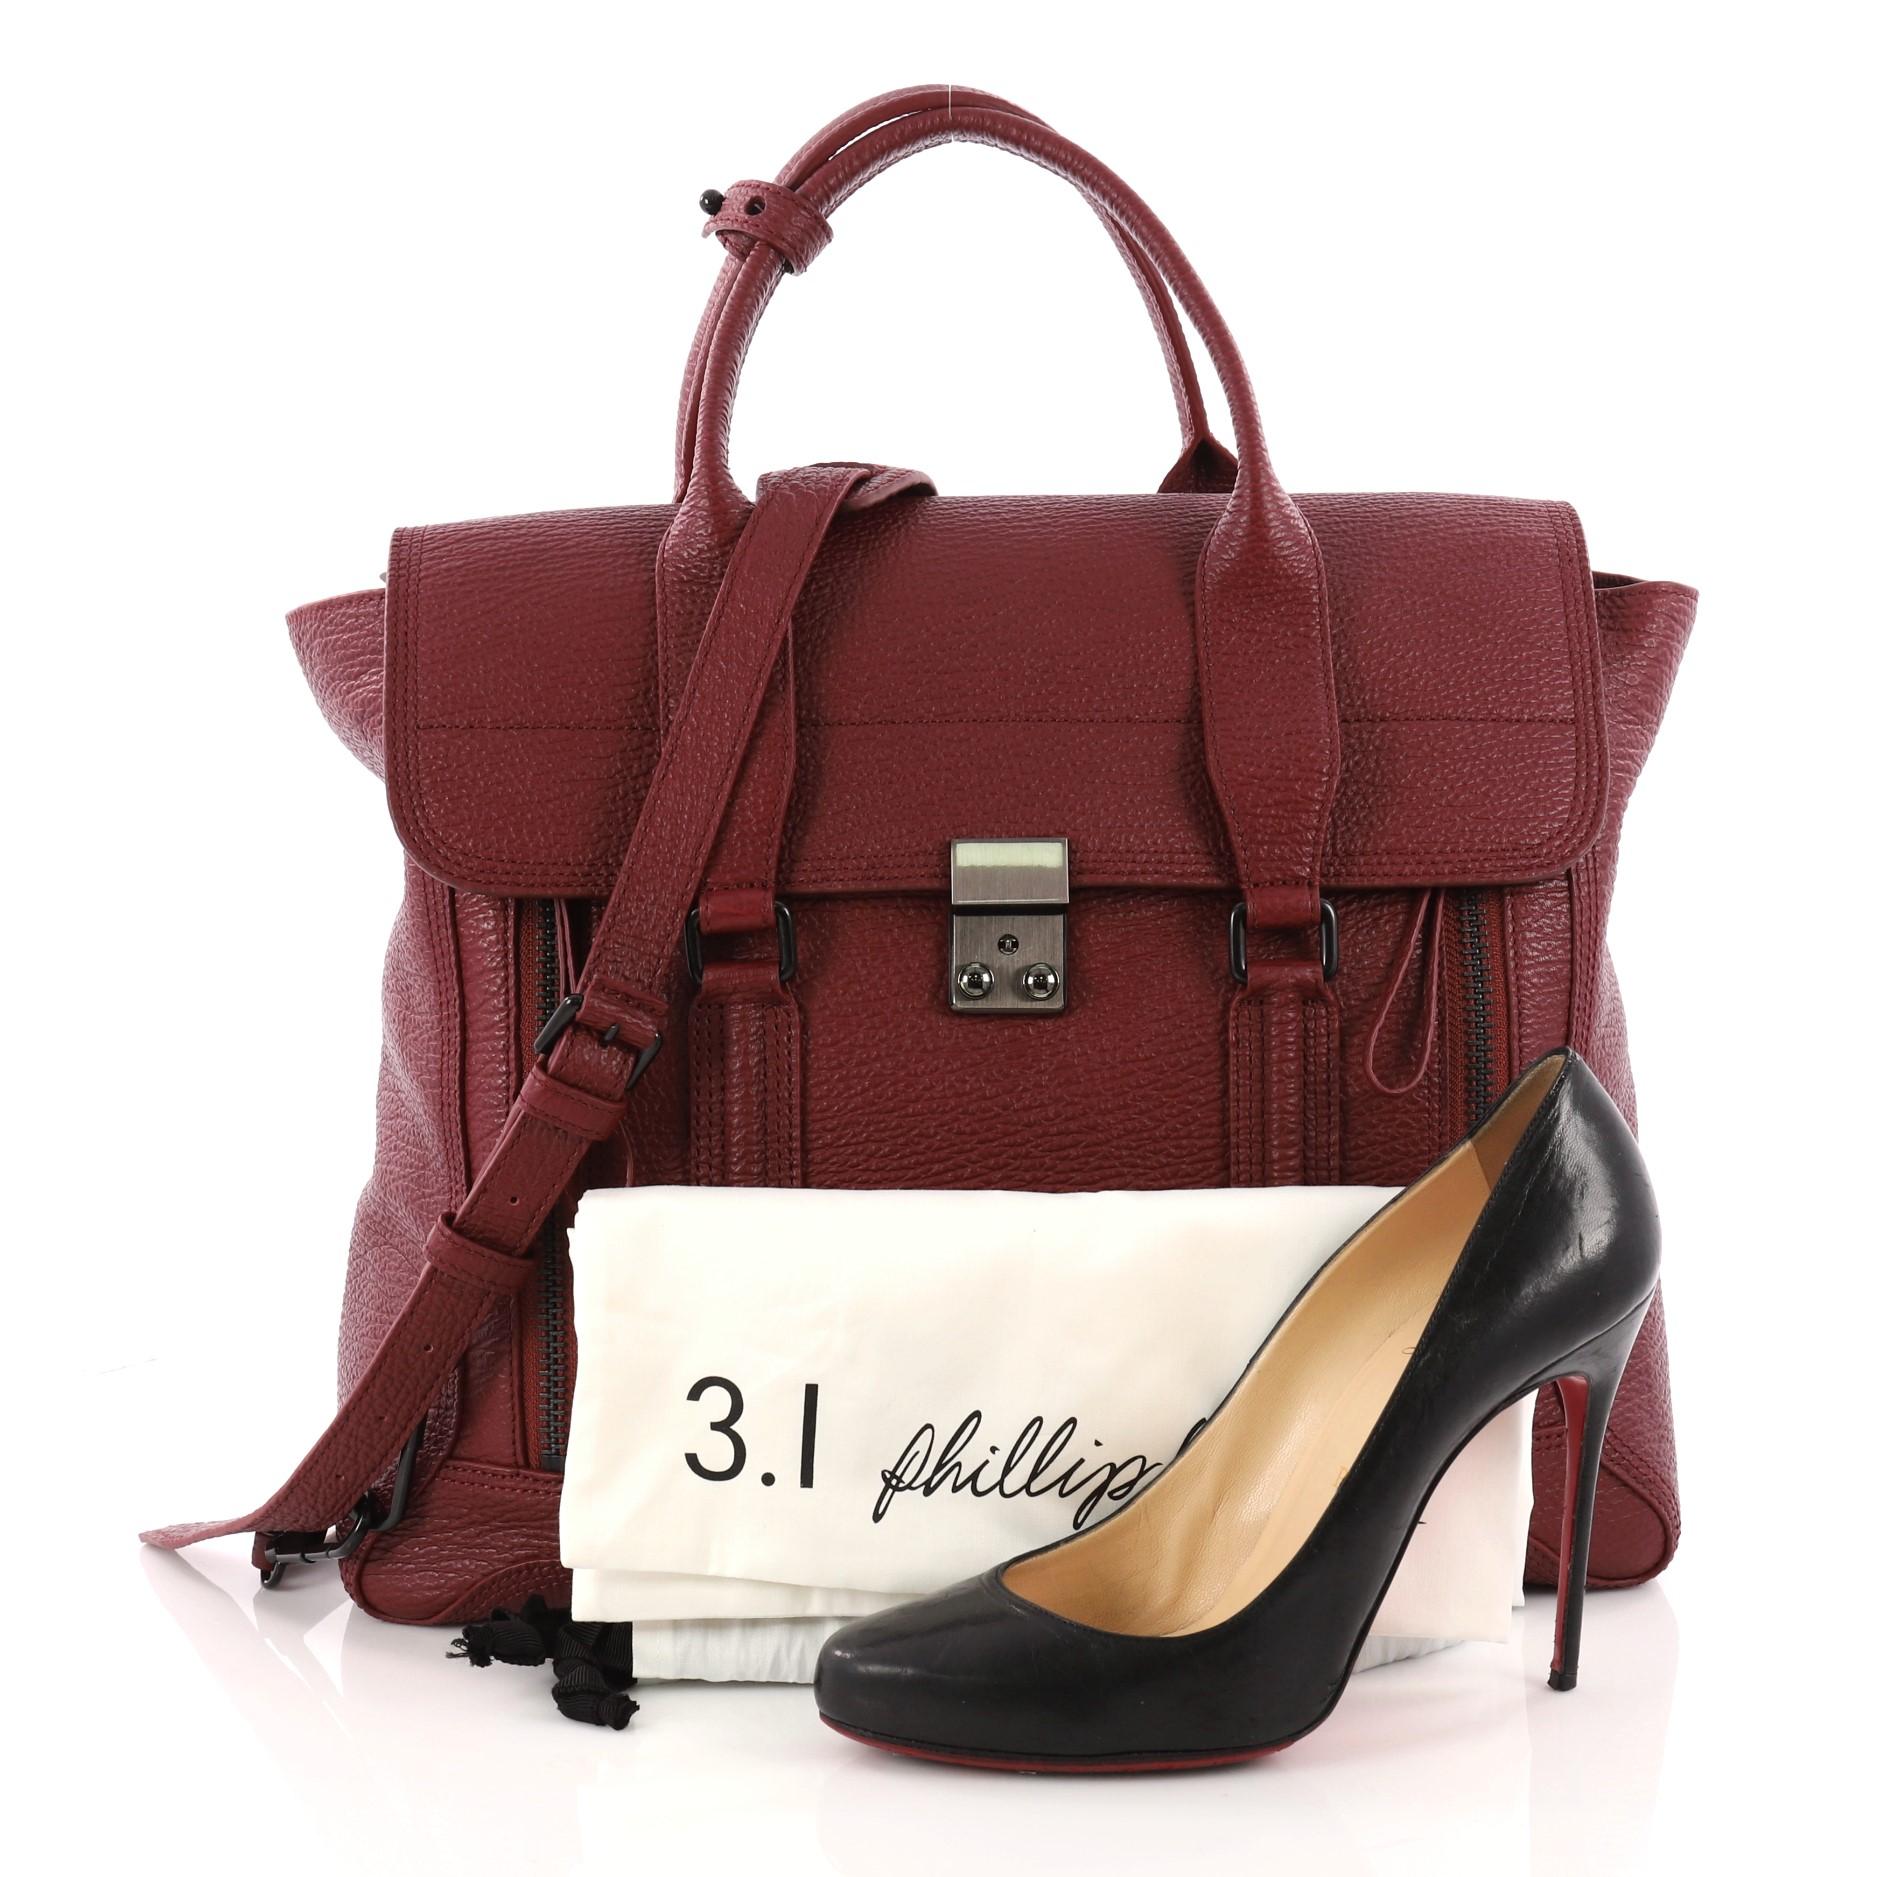 This authentic 3.1 Phillip Lim Pashli Satchel Leather Large is a practical bag with a stylish edge made for on-the-go moments. Crafted from maroon leather, this chic satchel features dual top handles, expandable zip sides, top flap push-lock closure